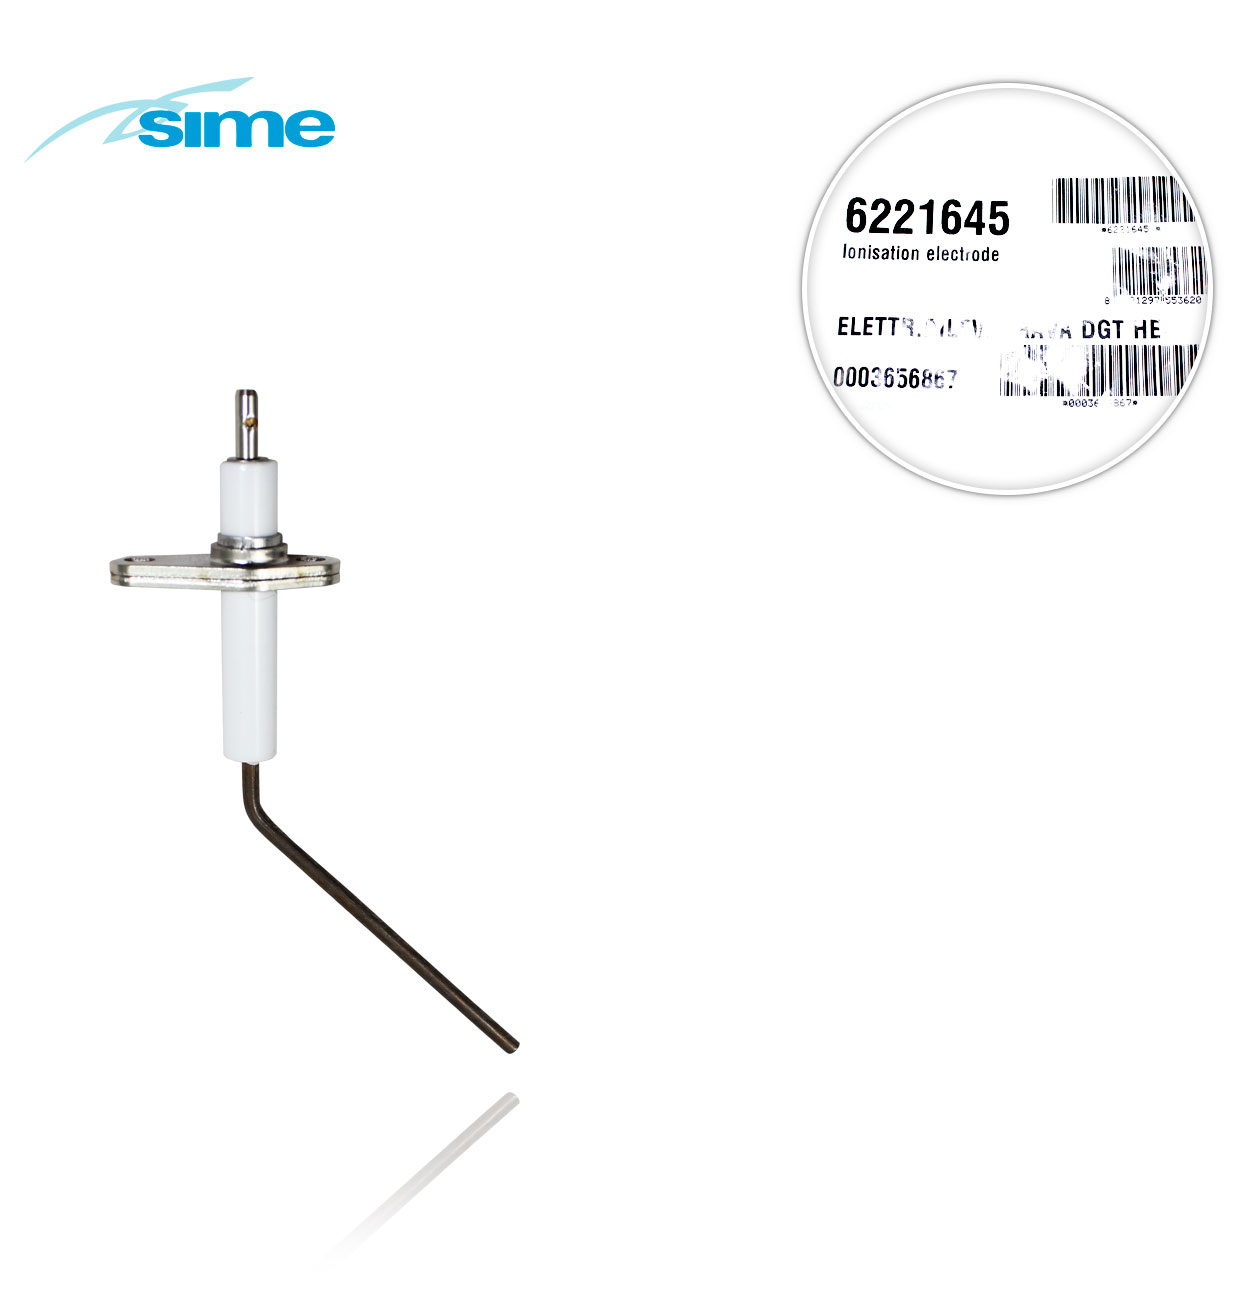 6221645 / 6221623 SIME PLANET DEWY IONISATION ELECTRODE